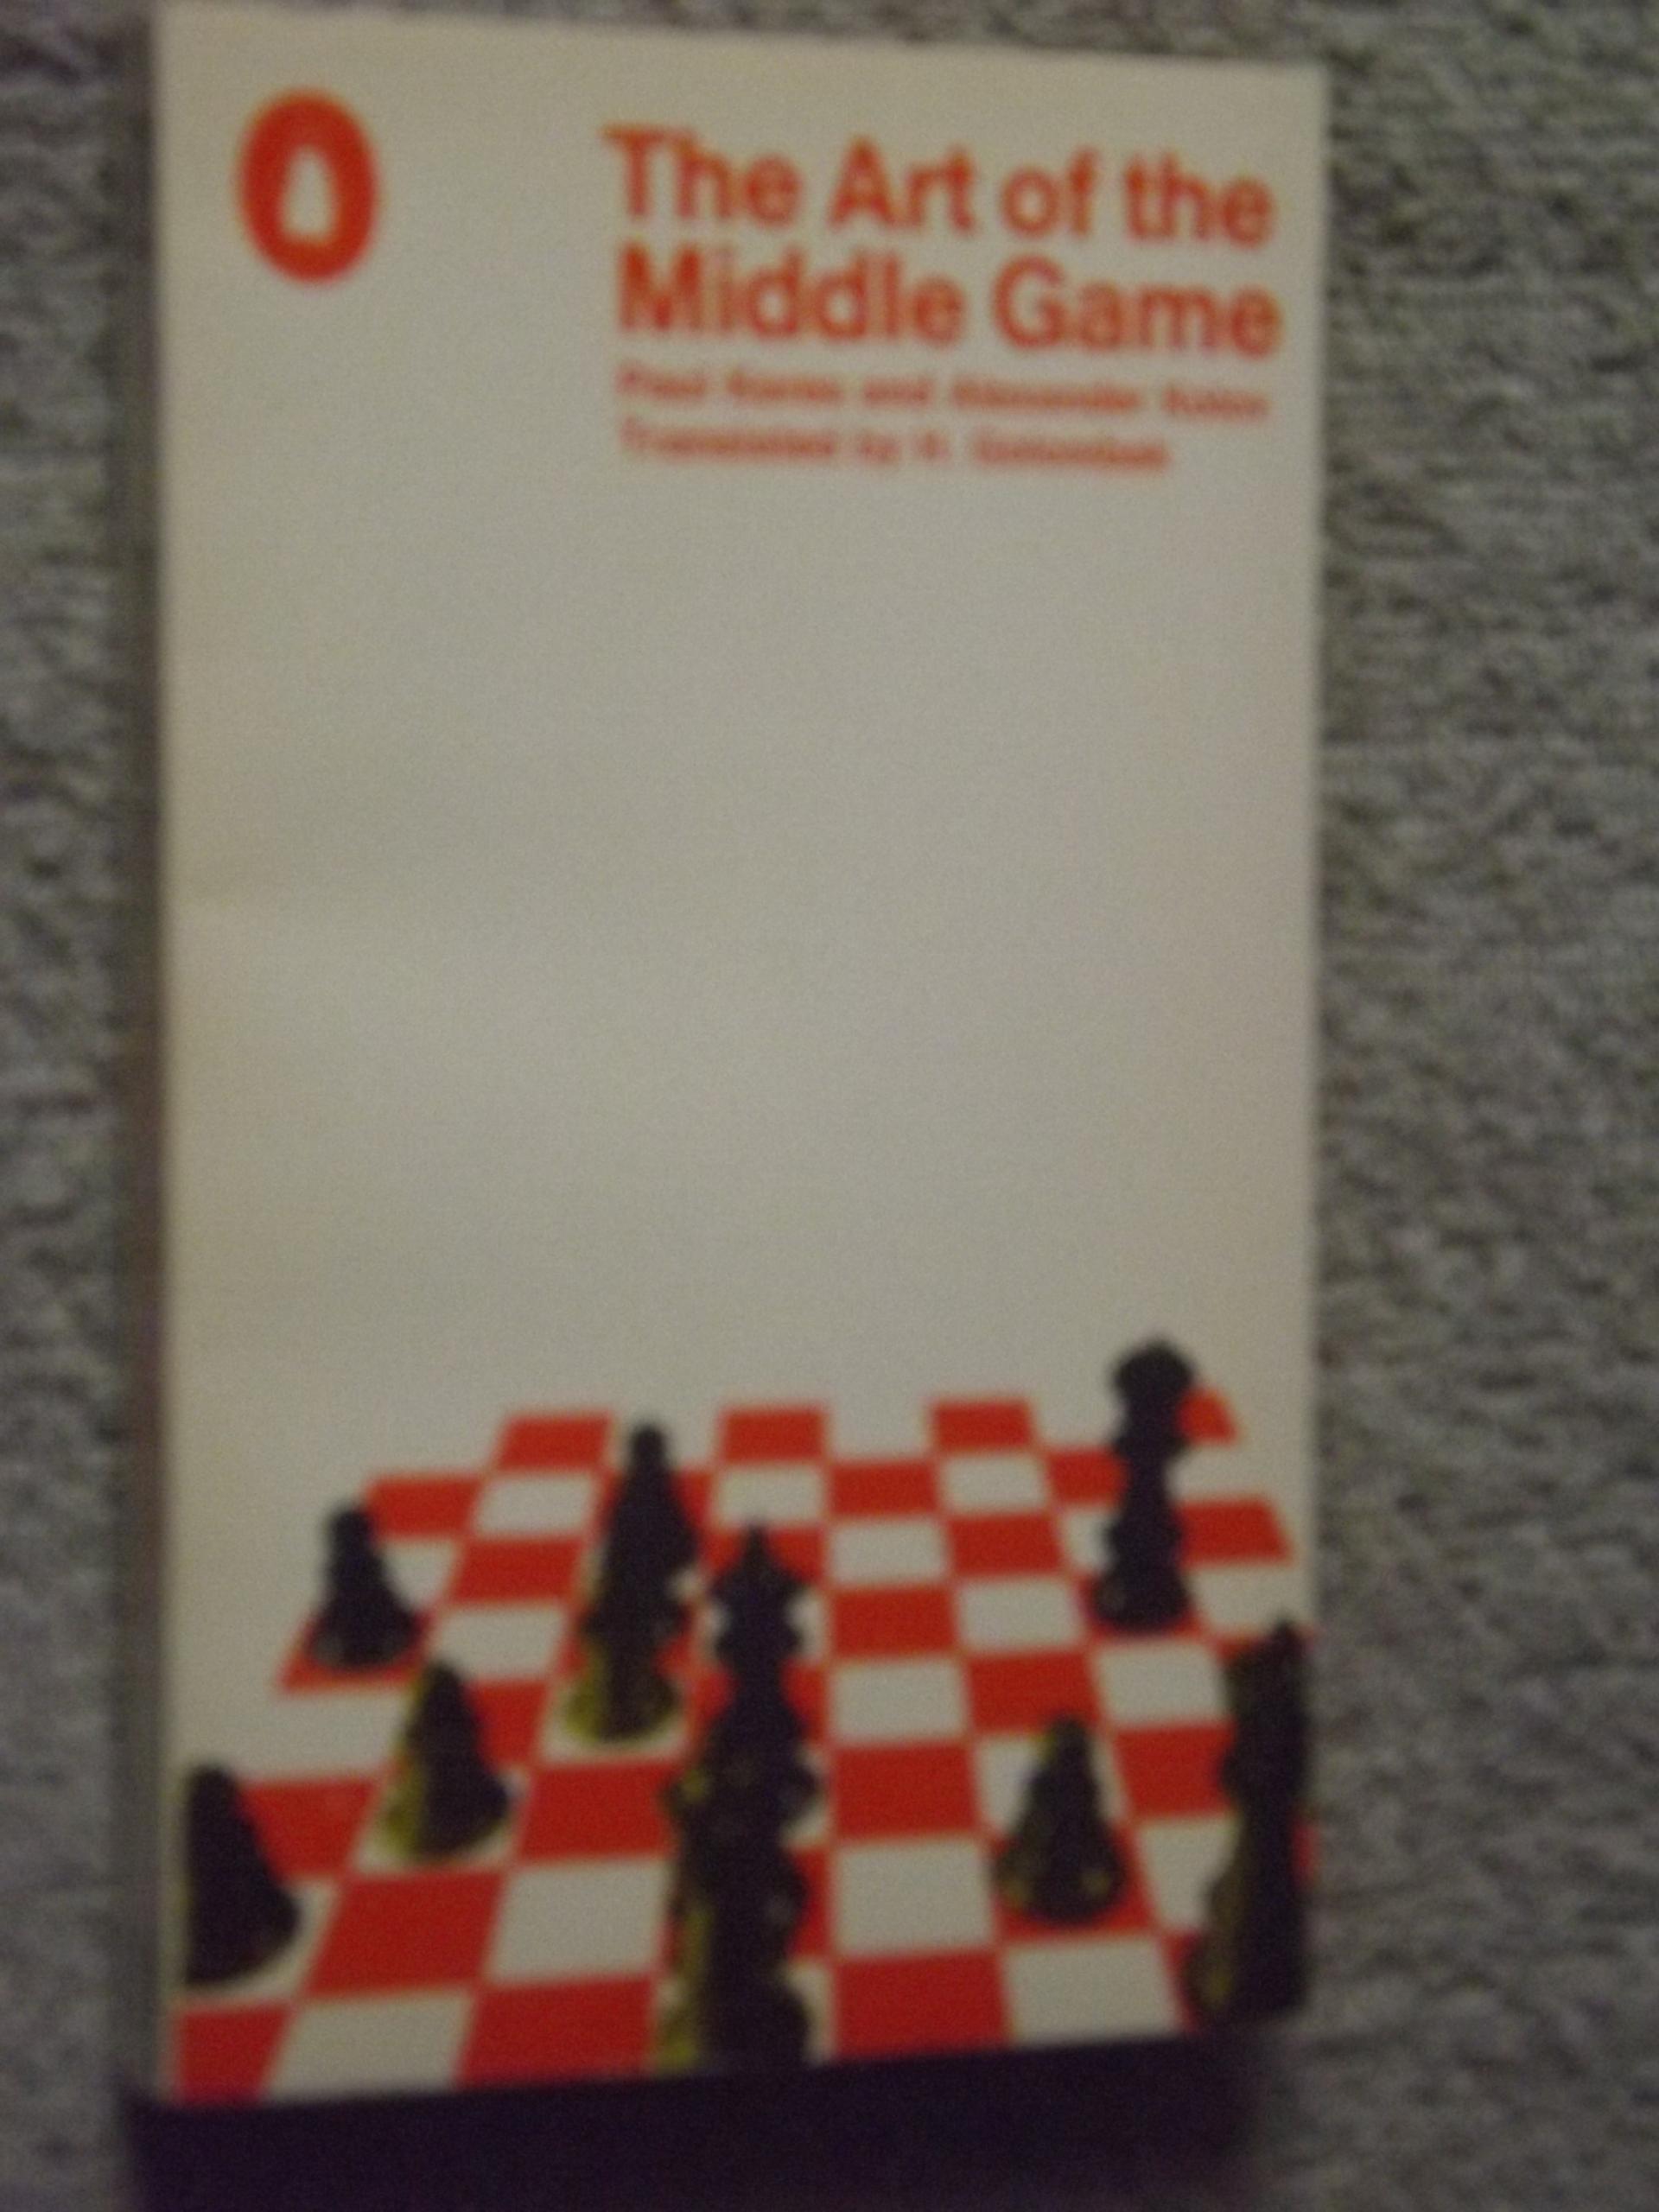 The Art of the Middle Game, by Paul Keres and Alexander Kotov